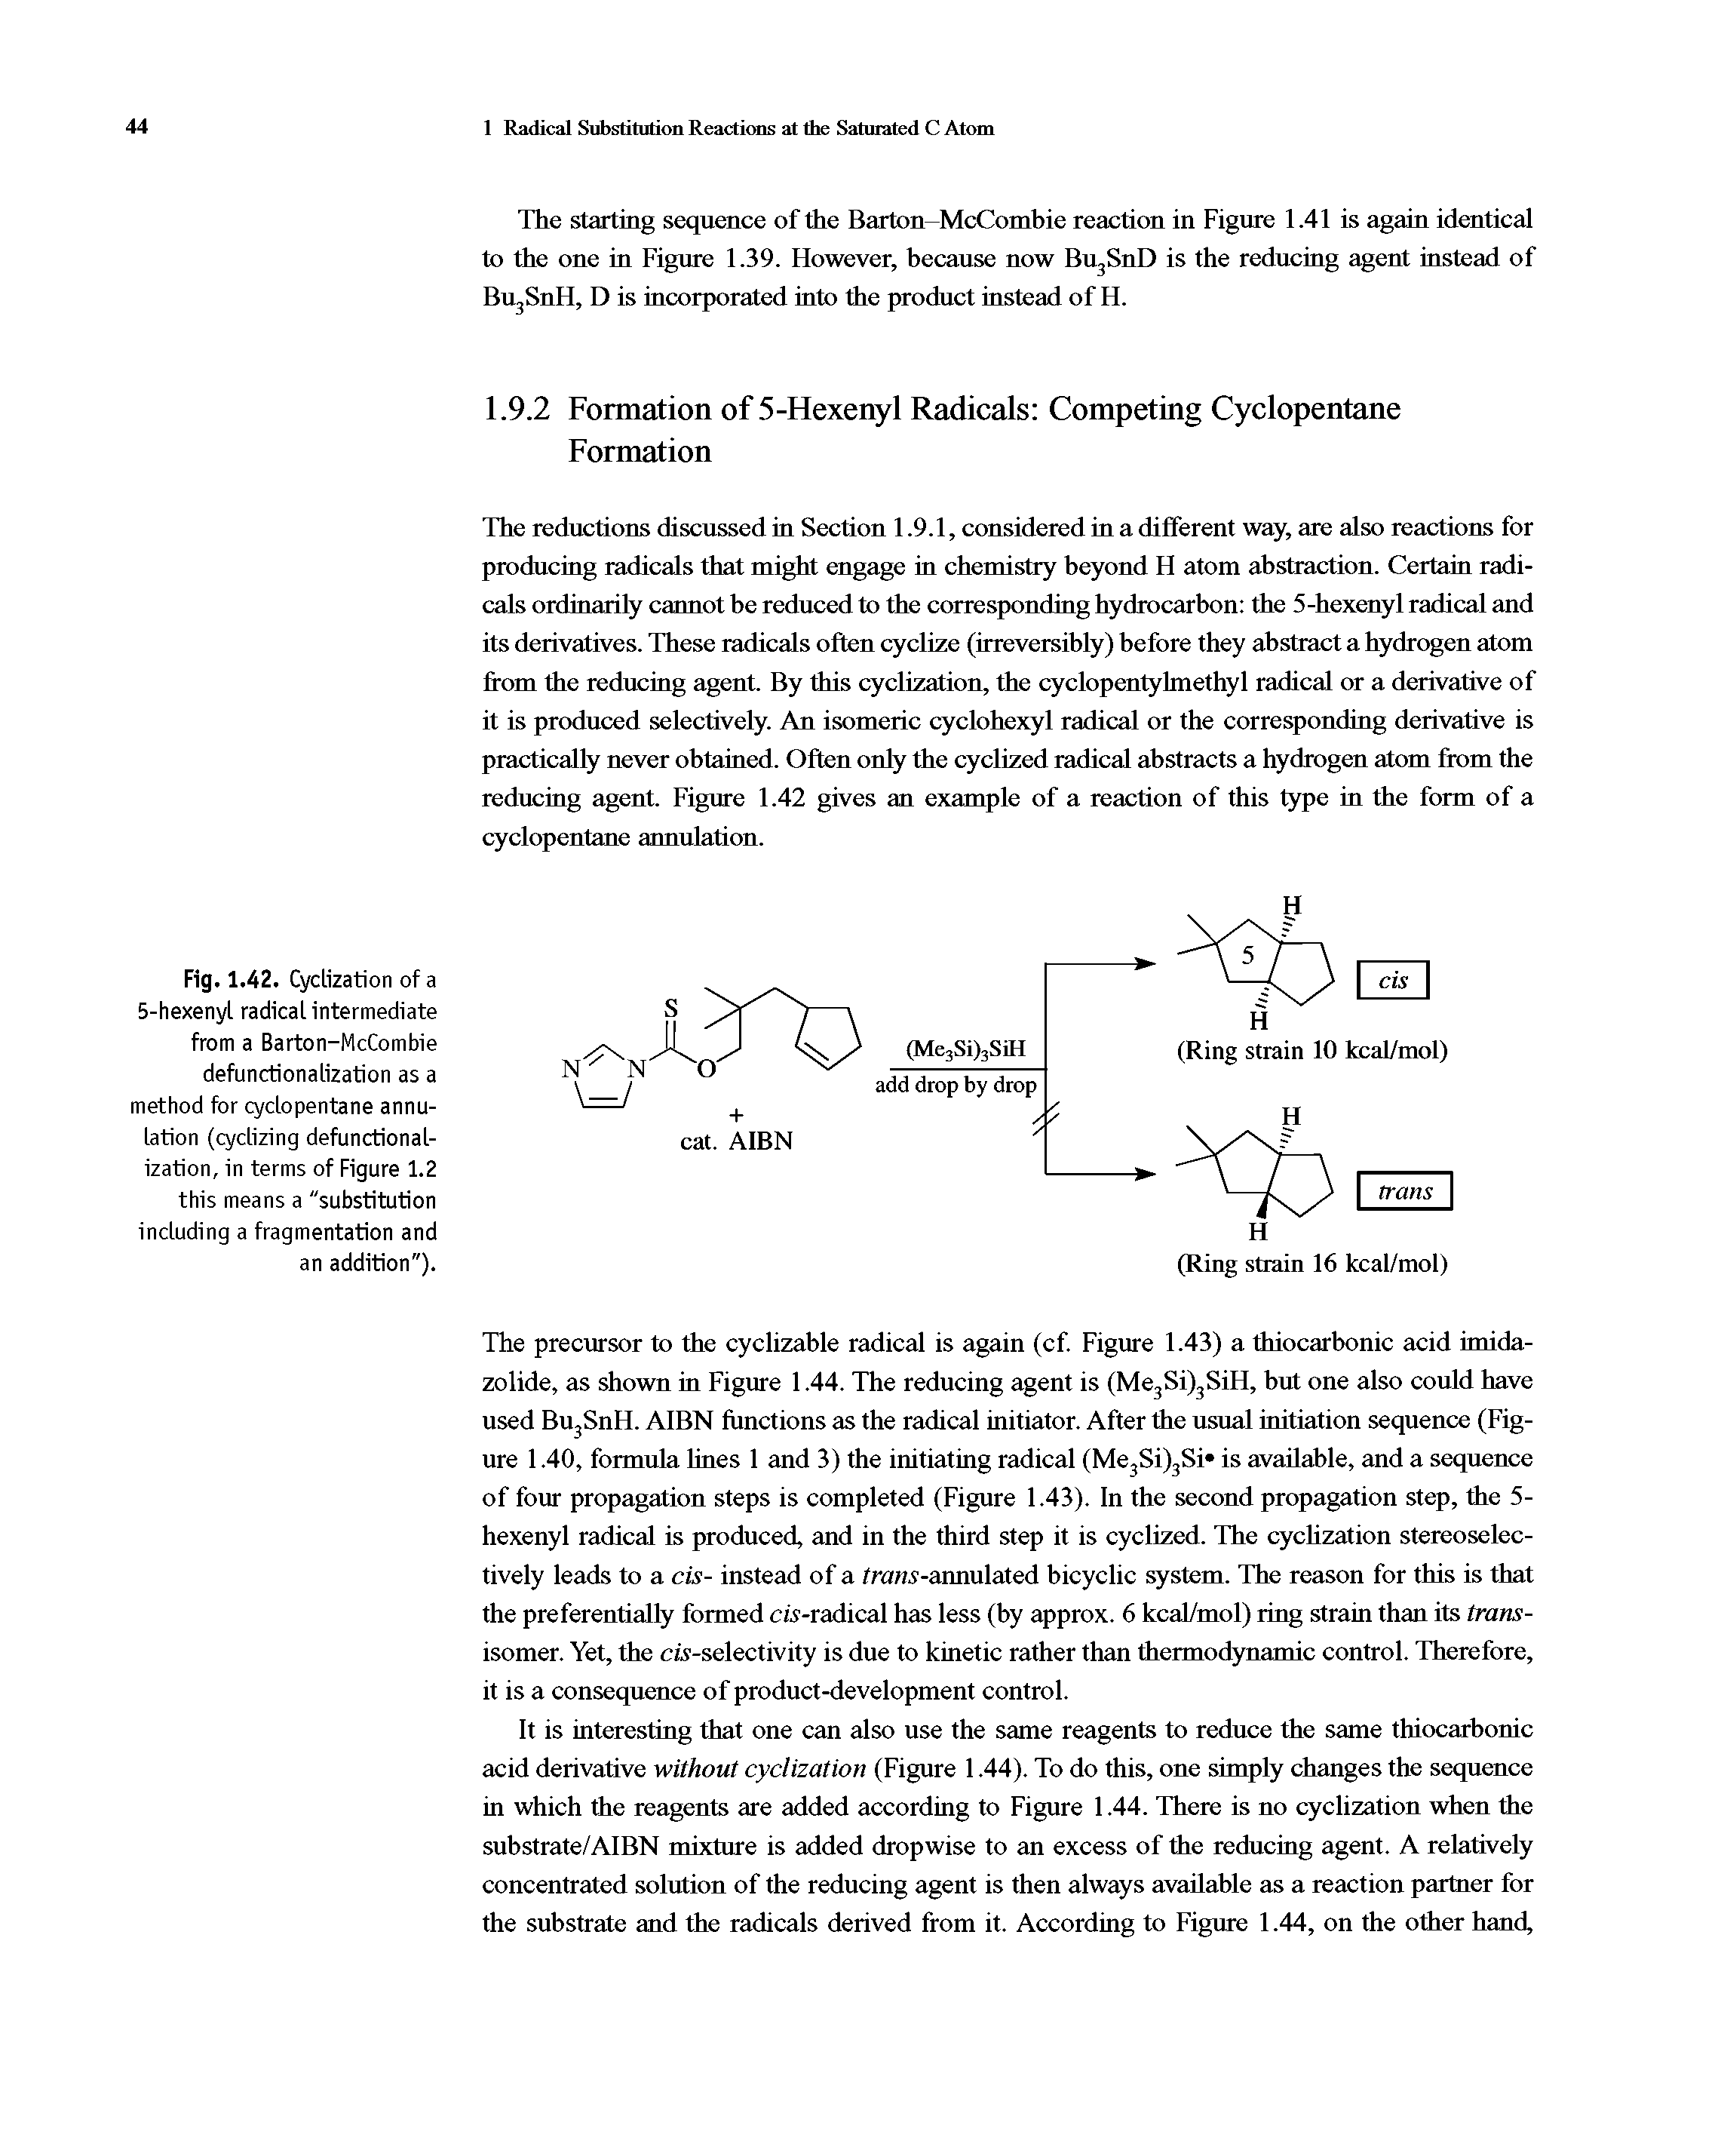 Fig. 1.42. Cyclization of a 5-hexenyl radical intermediate from a Barton-McCombie defunctionalization as a method for cyclopentane annulation (cyclizing defunctionalization, in terms of Figure 1.2 this means a "substitution including a fragmentation and an addition ).